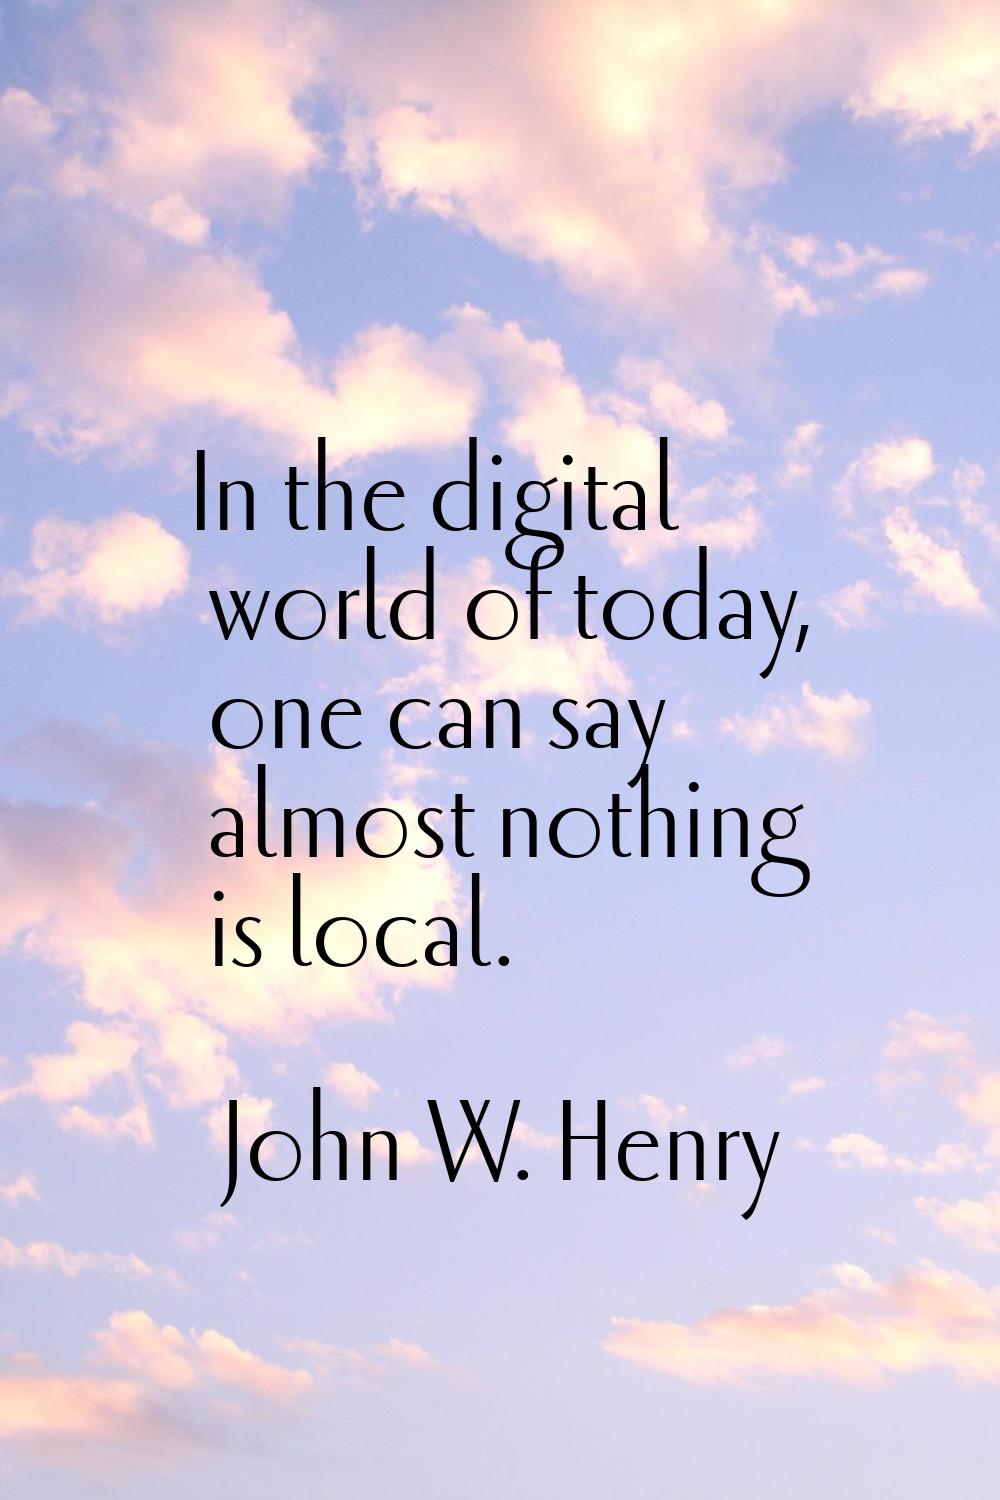 In the digital world of today, one can say almost nothing is local.